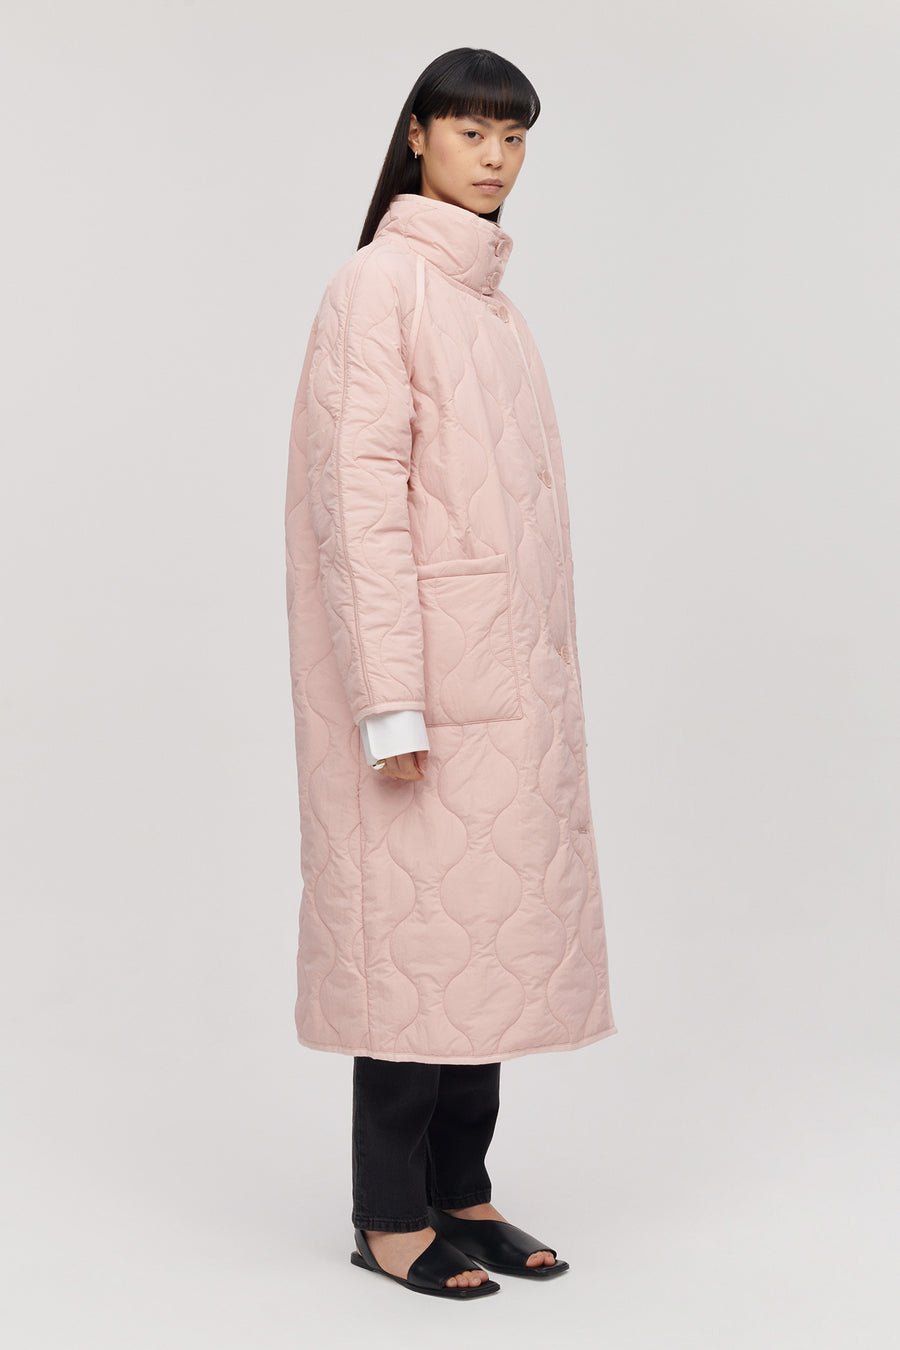 COURTNEY LONG QUILTED COAT SOFT PINK